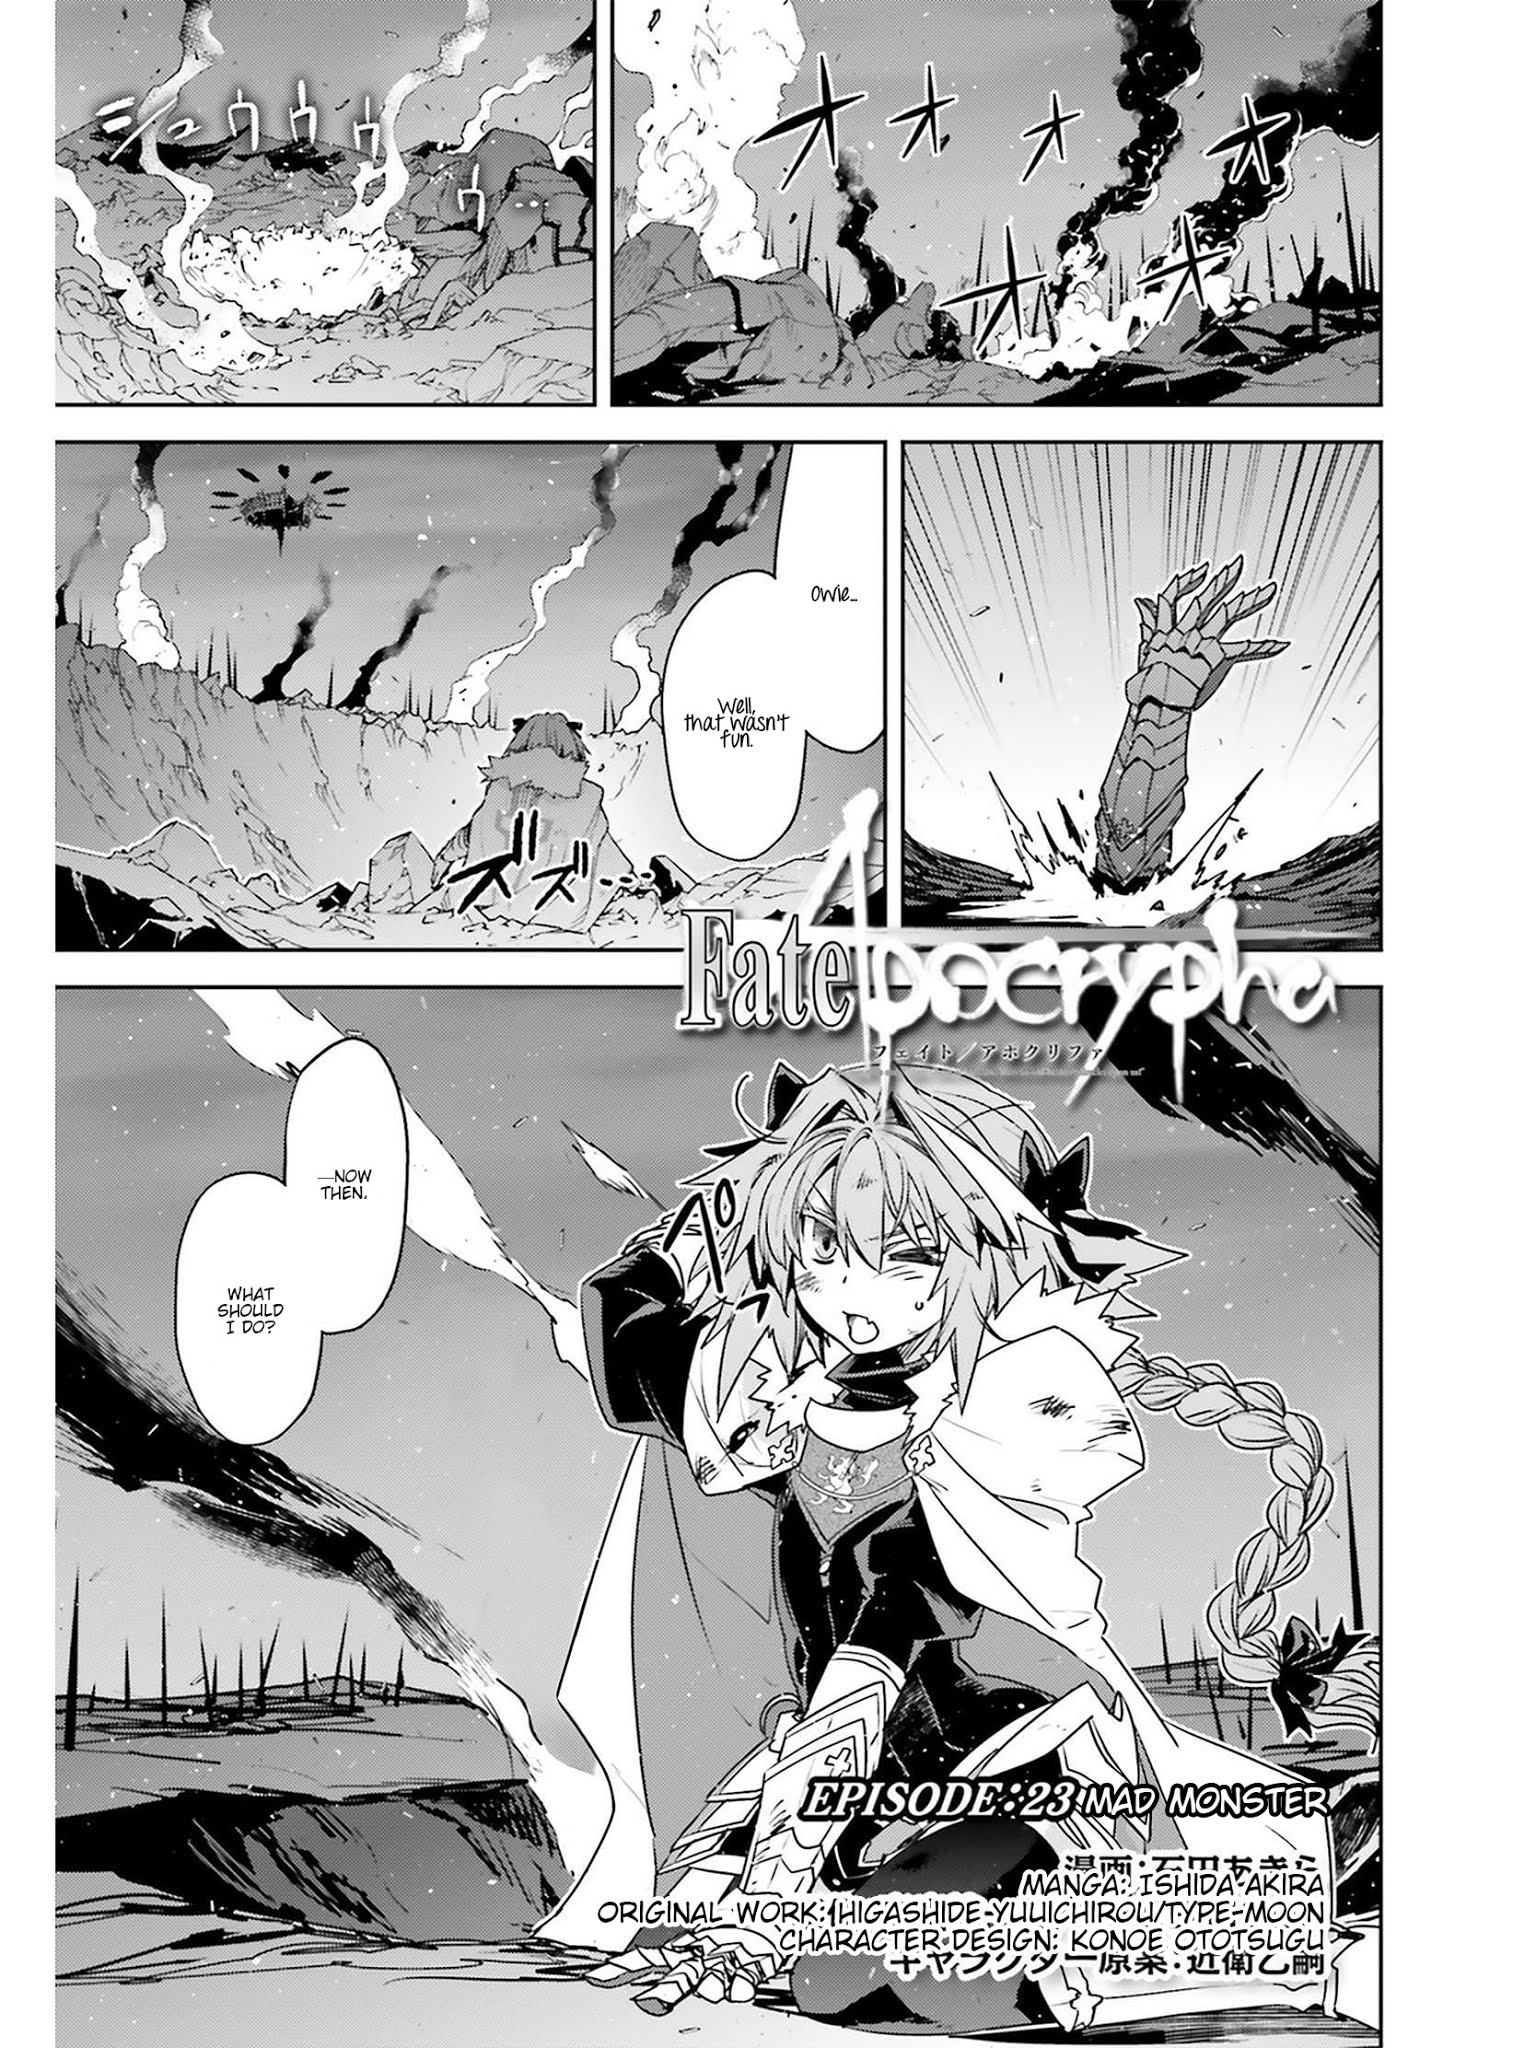 Fate/apocrypha Chapter 23: Episode: 23 Mad Monster - Picture 1